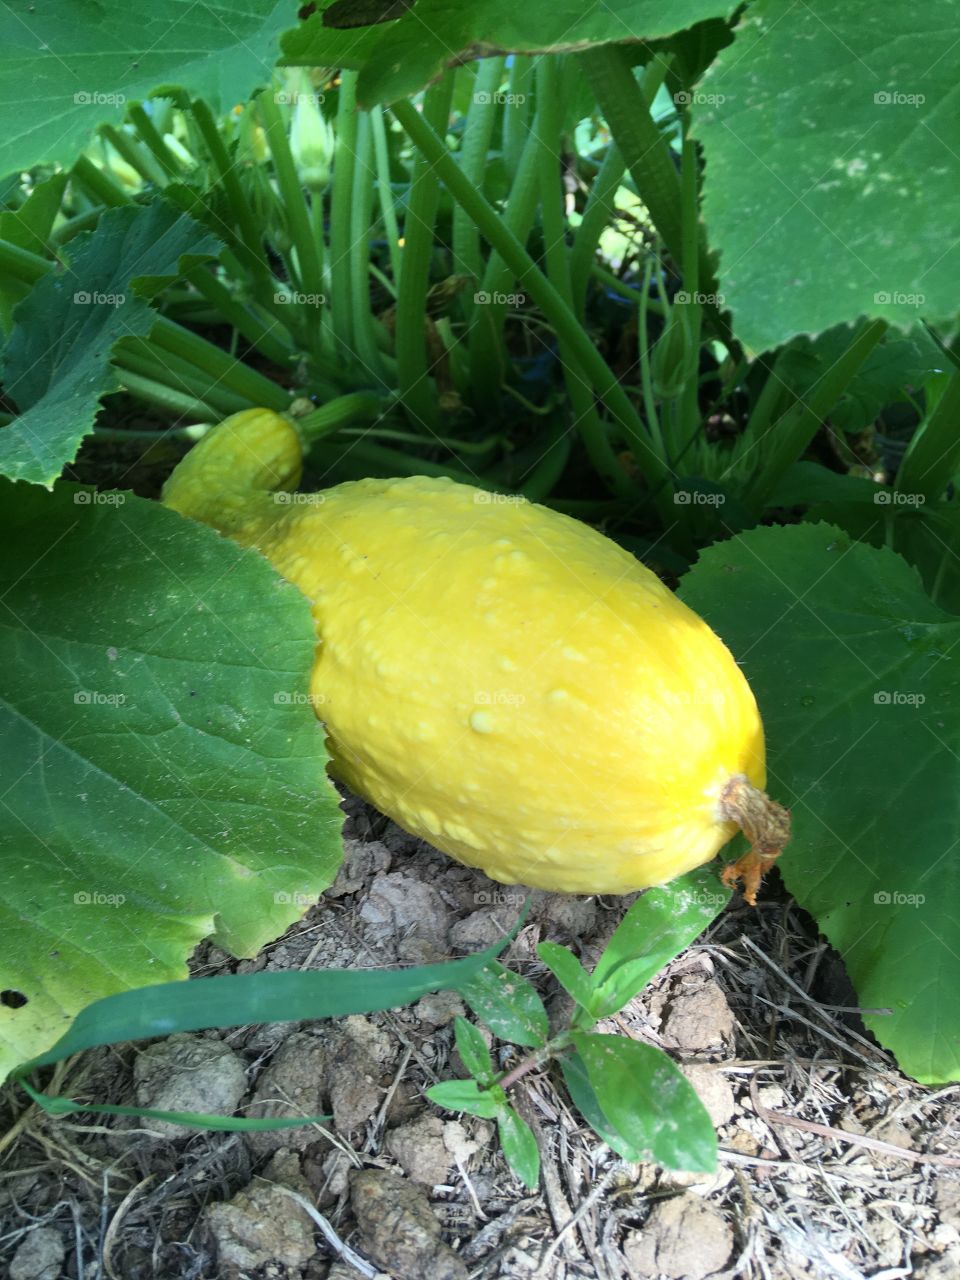 Yellow Squash peeking out of its vines, shaded and protected the leaves.